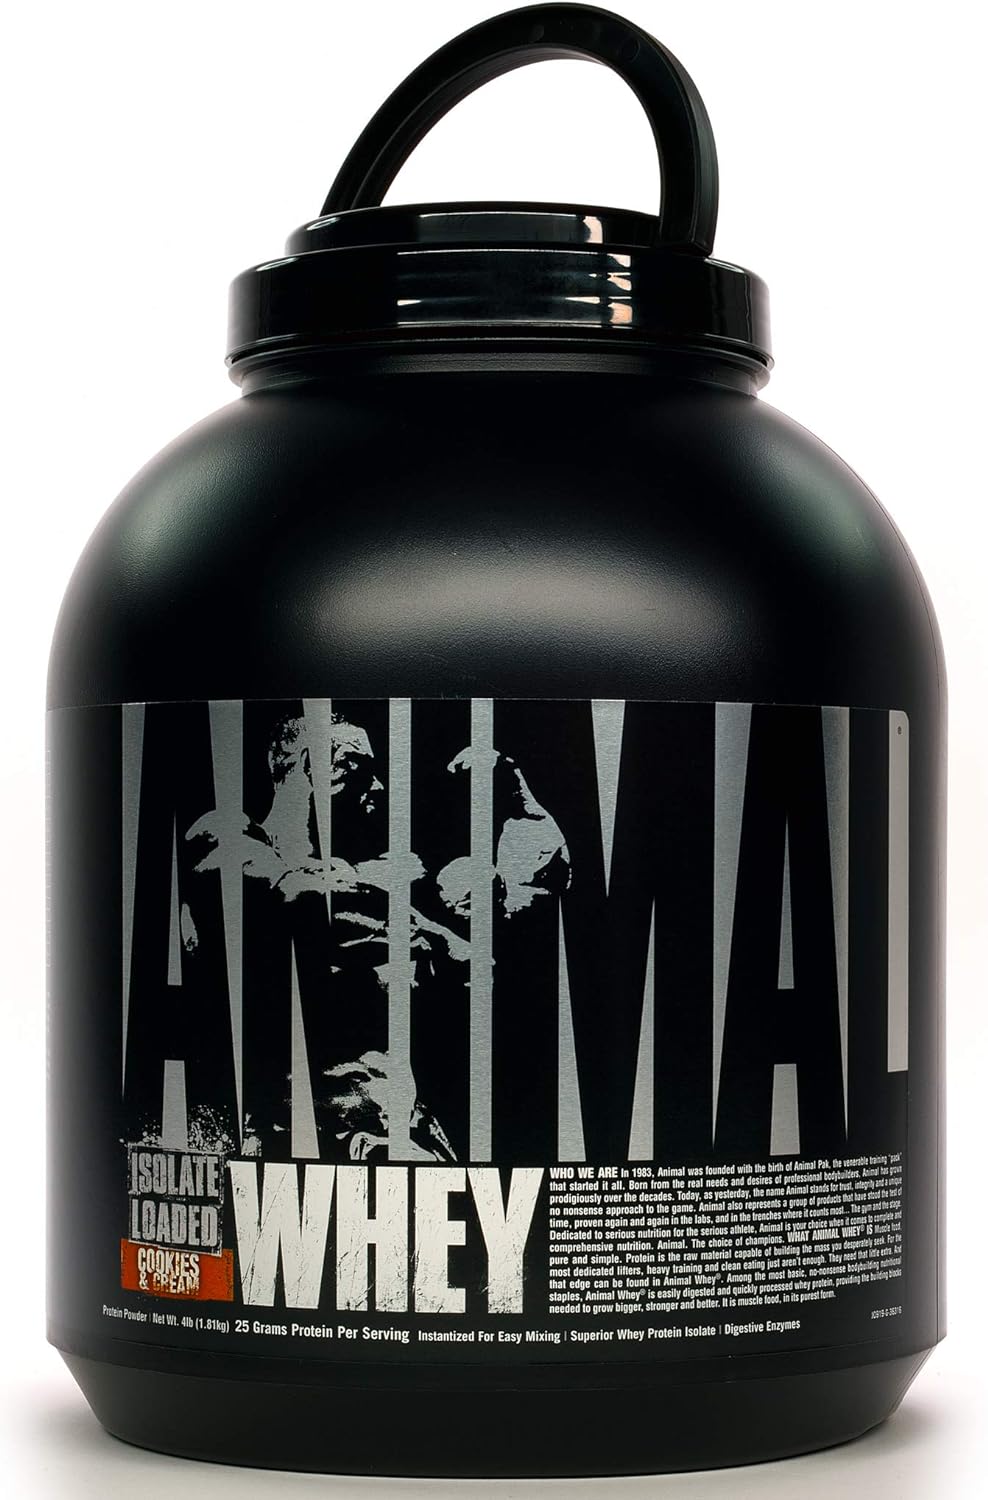 Animal Whey Isolate Protein Powder, Loaded for Post Workout and Recove